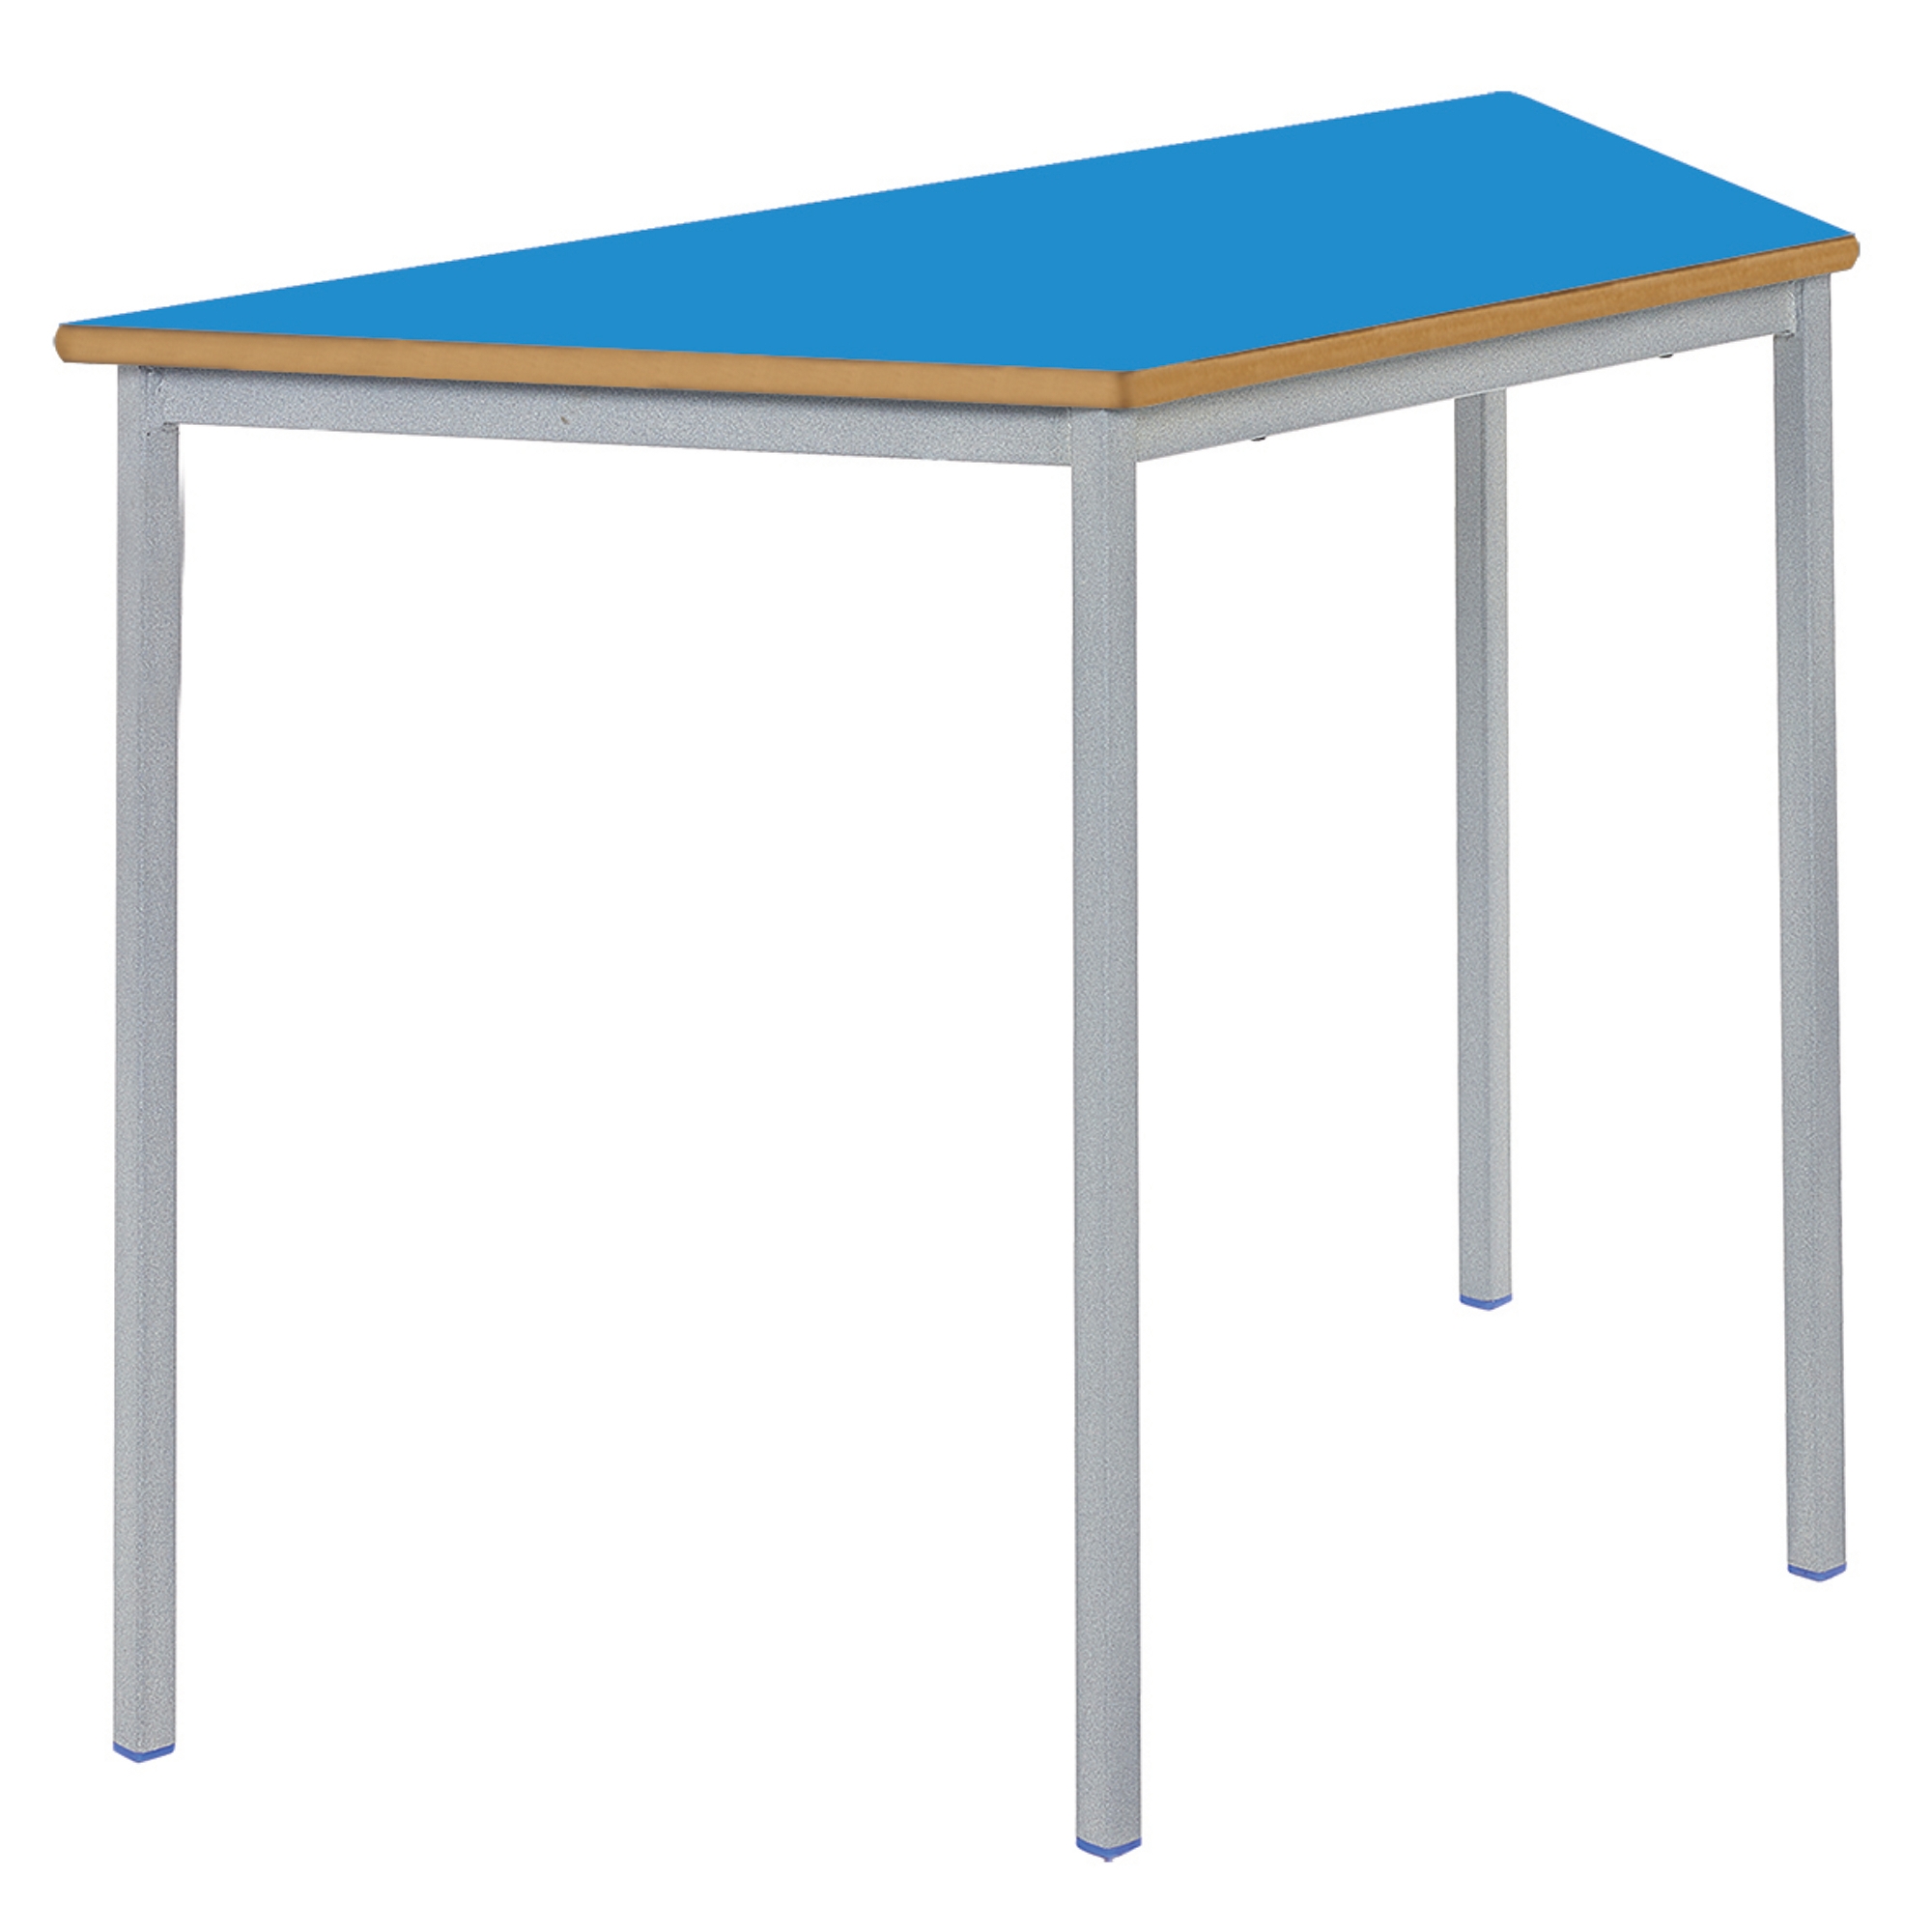 Classmates Trapezoidal Fully Welded Classroom Table - 1100 x 550 x 530mm - Blue